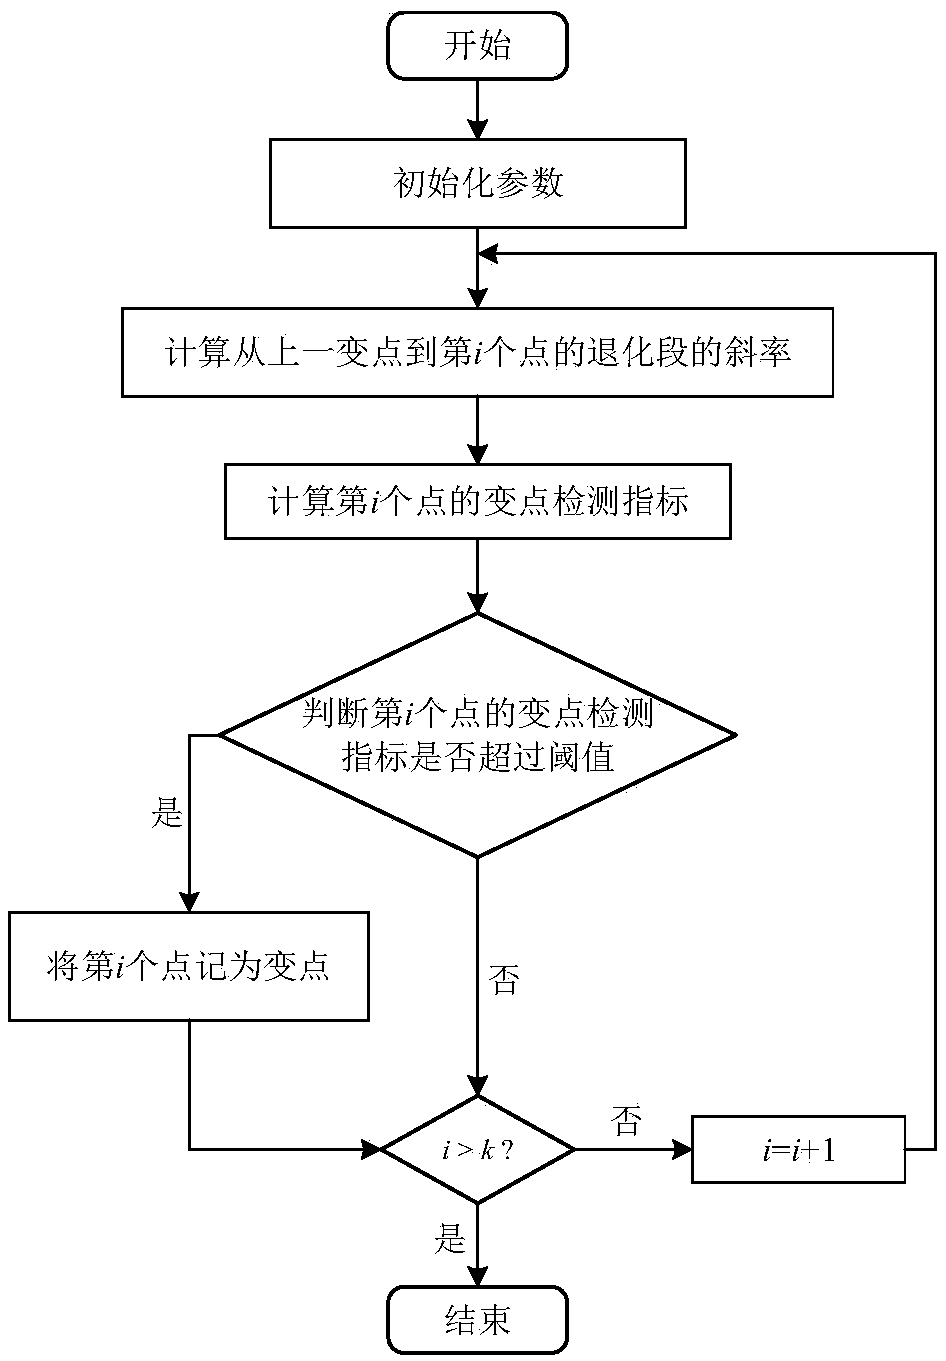 Multi-mode degradation process modeling and residual service life prediction method